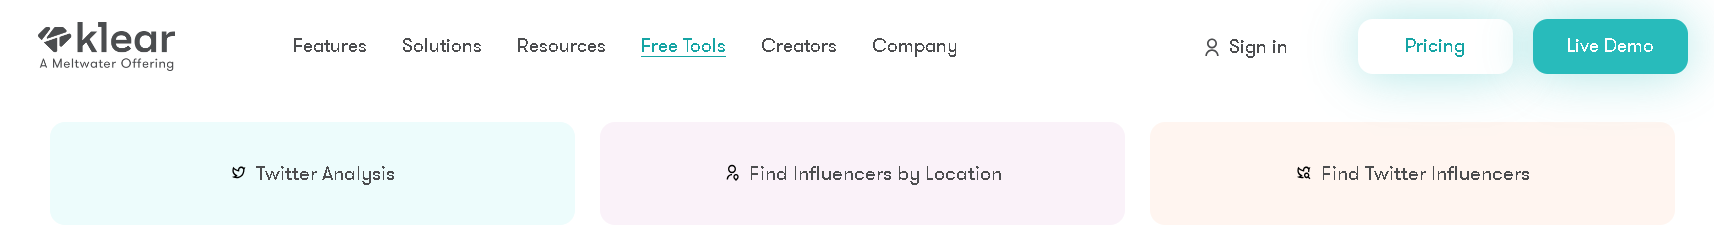 Klear has 3 different free influencer marketing tools.